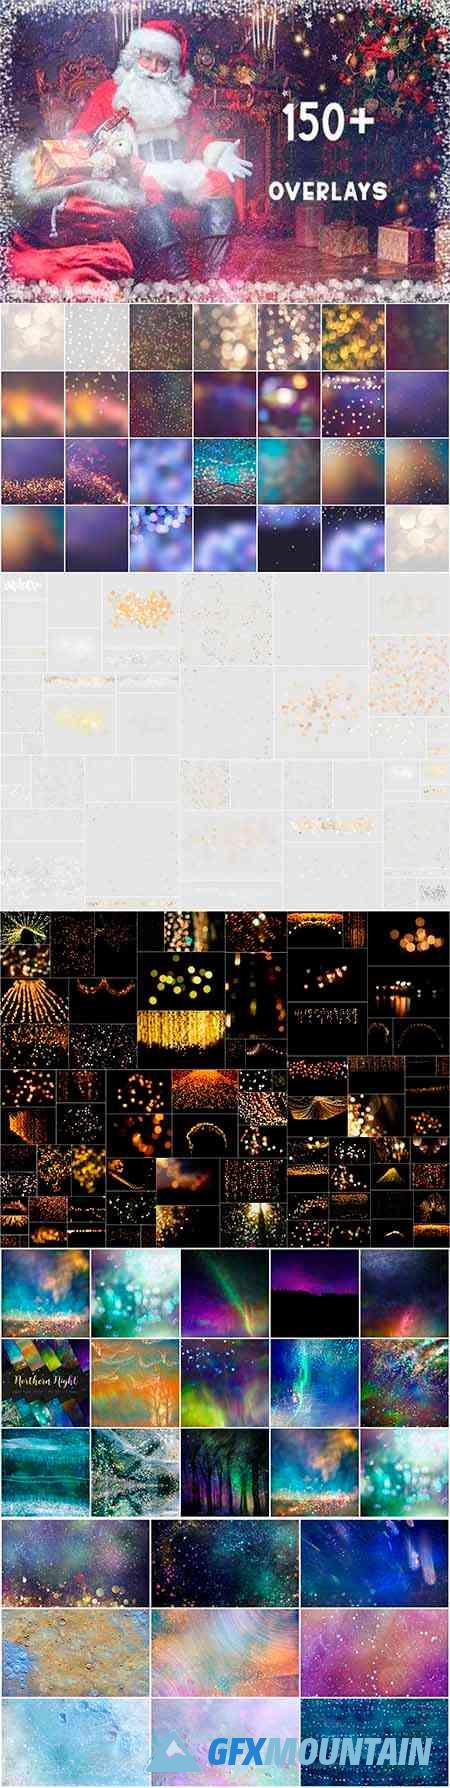 Holiday Overlays Collection